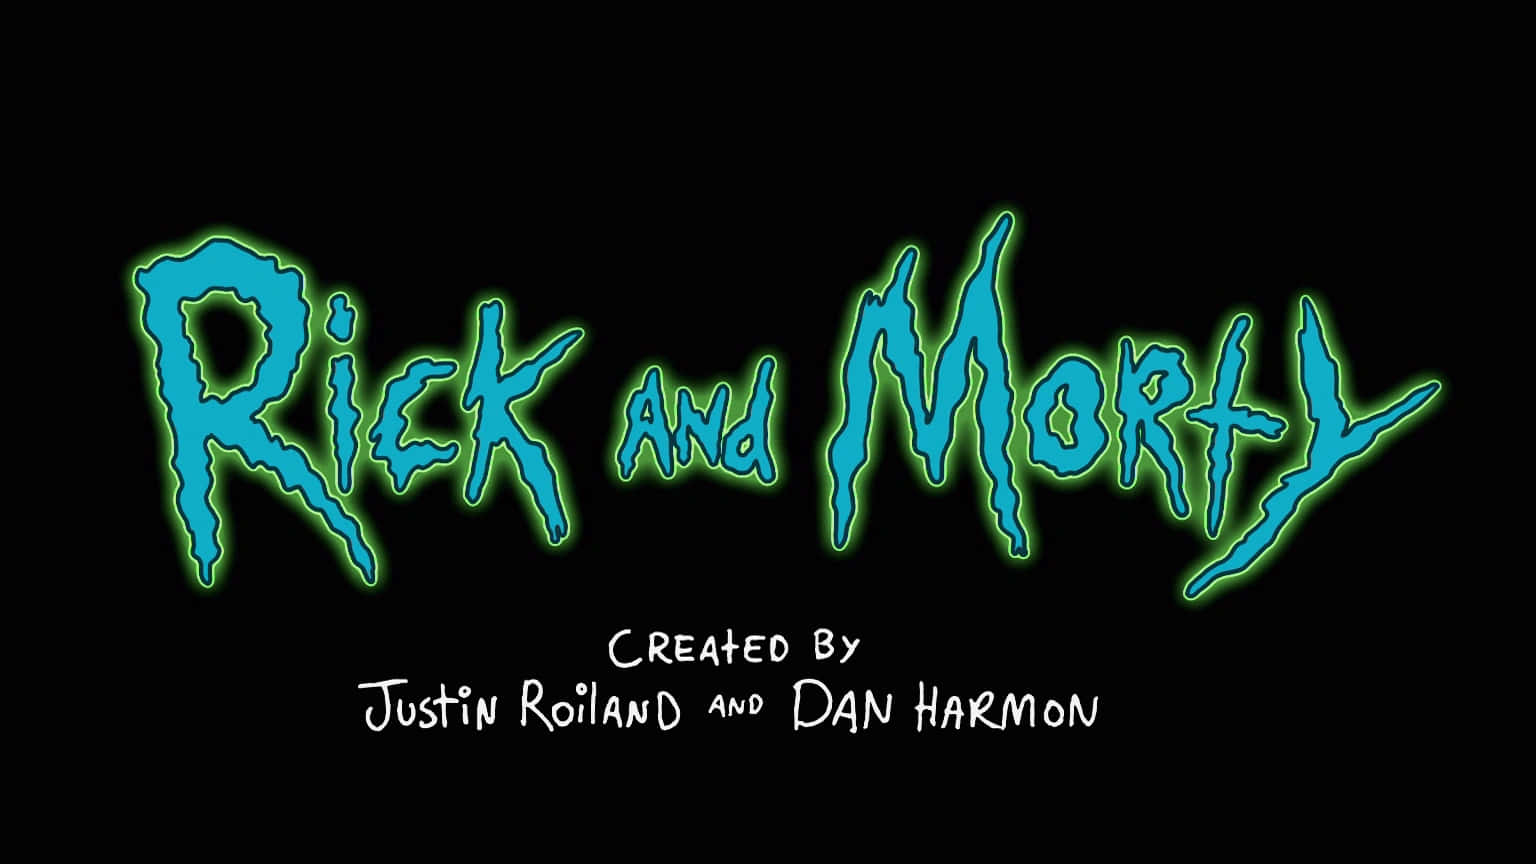 Best Friends, Rick and Morty